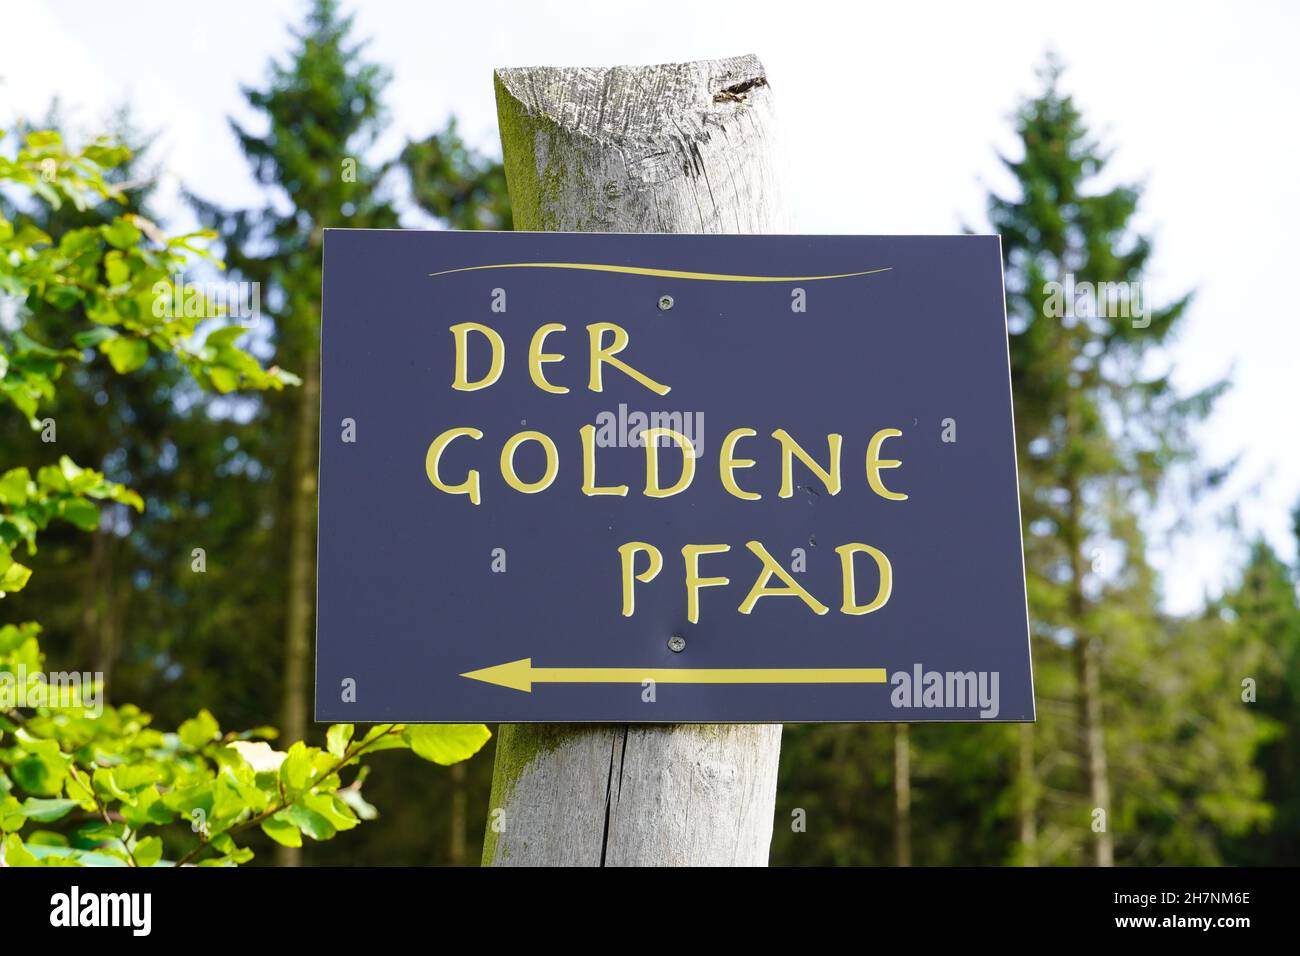 Shield in nature. Signpost on a hiking trail in the Sauerland. The golden path. Stock Photo